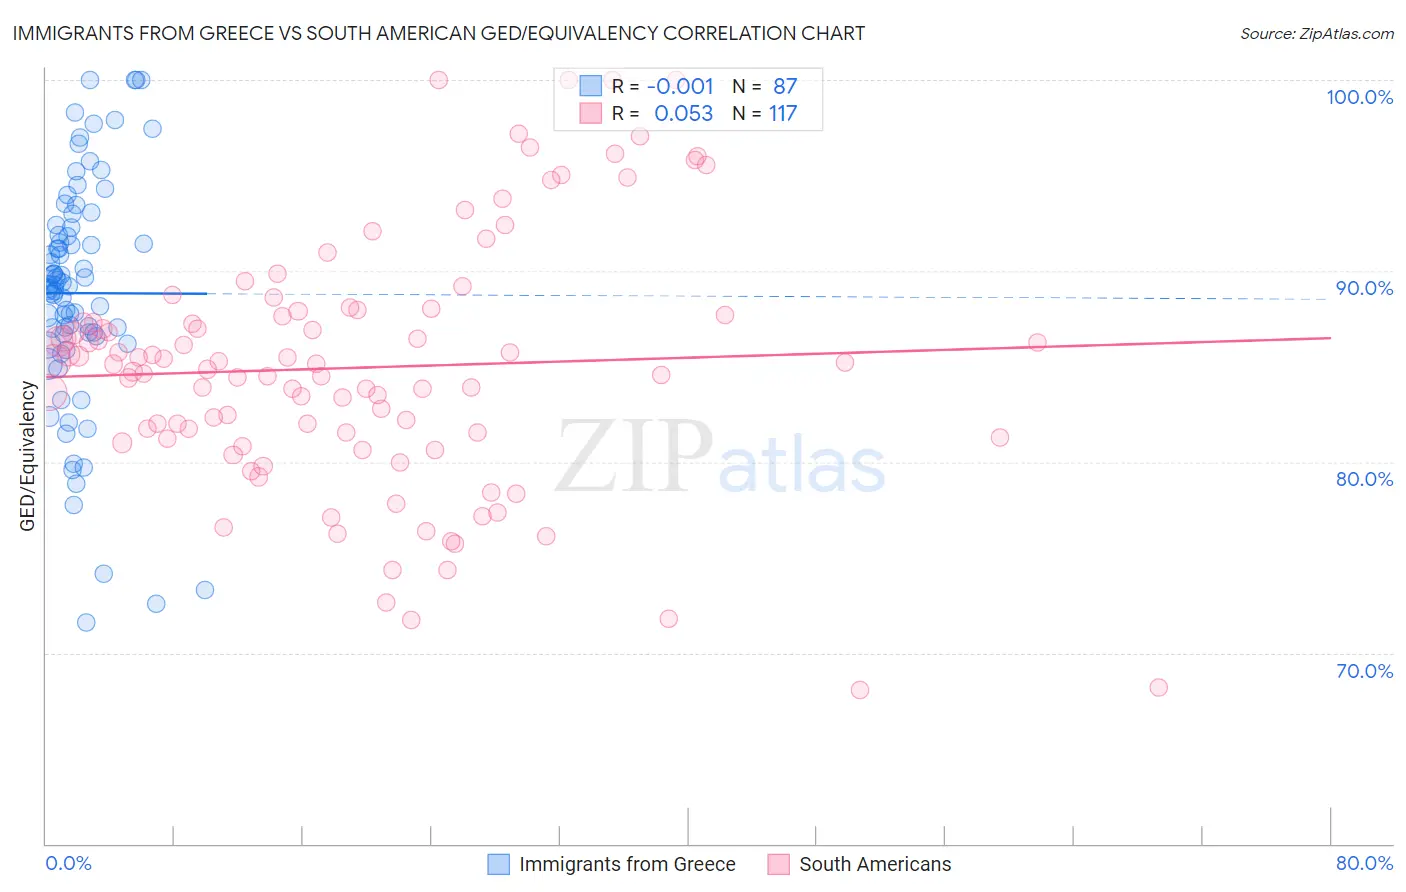 Immigrants from Greece vs South American GED/Equivalency